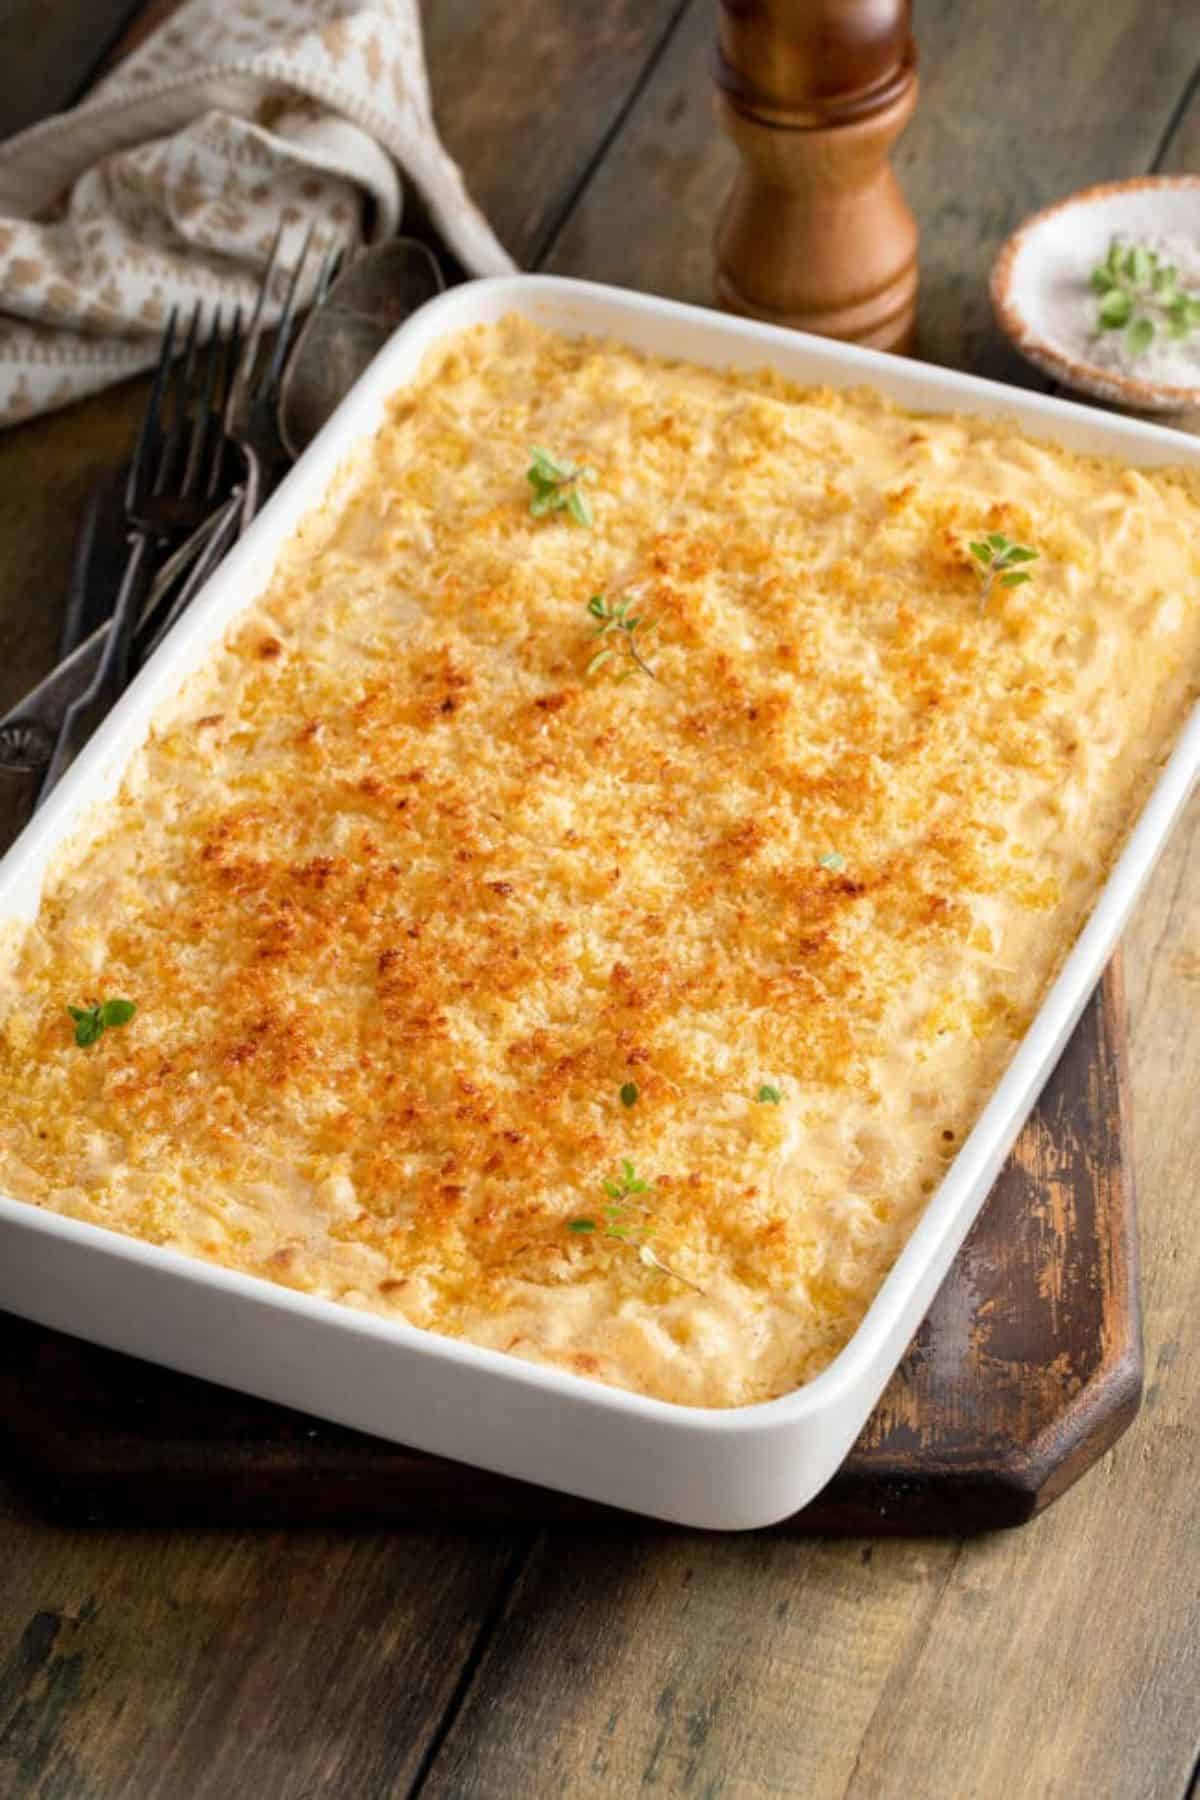 Delicious Homemade Baked Mac & Cheese in a white casserole.